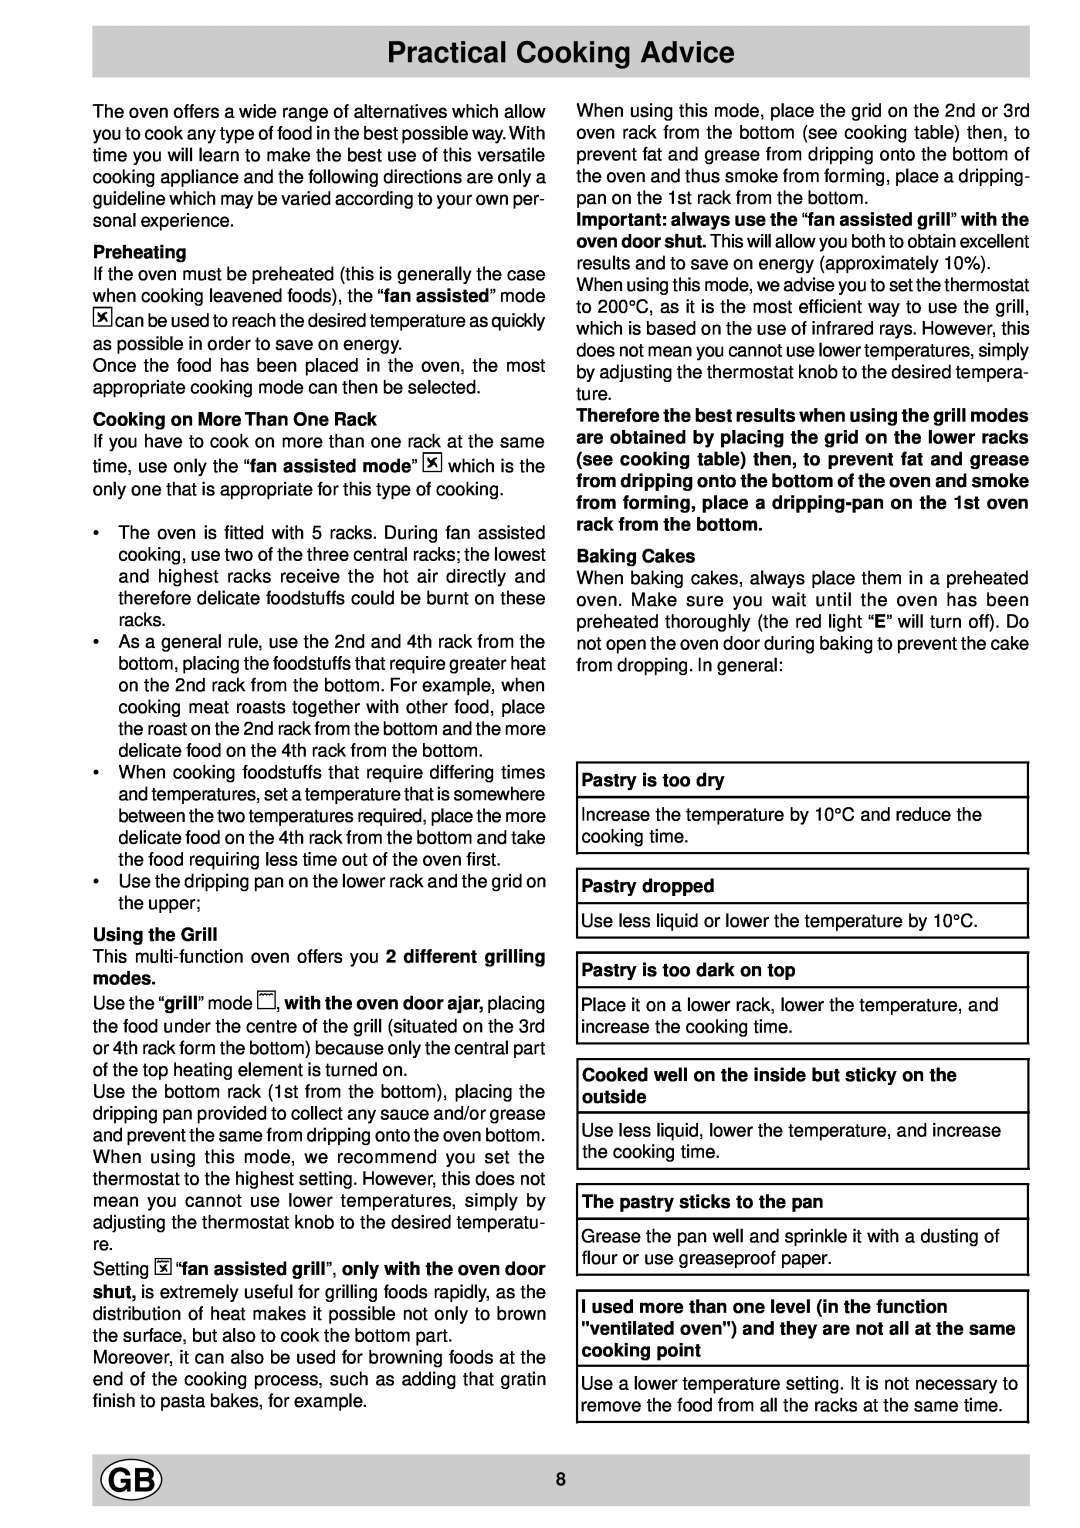 Hotpoint SD 52K - SD 52 manual Practical Cooking Advice 